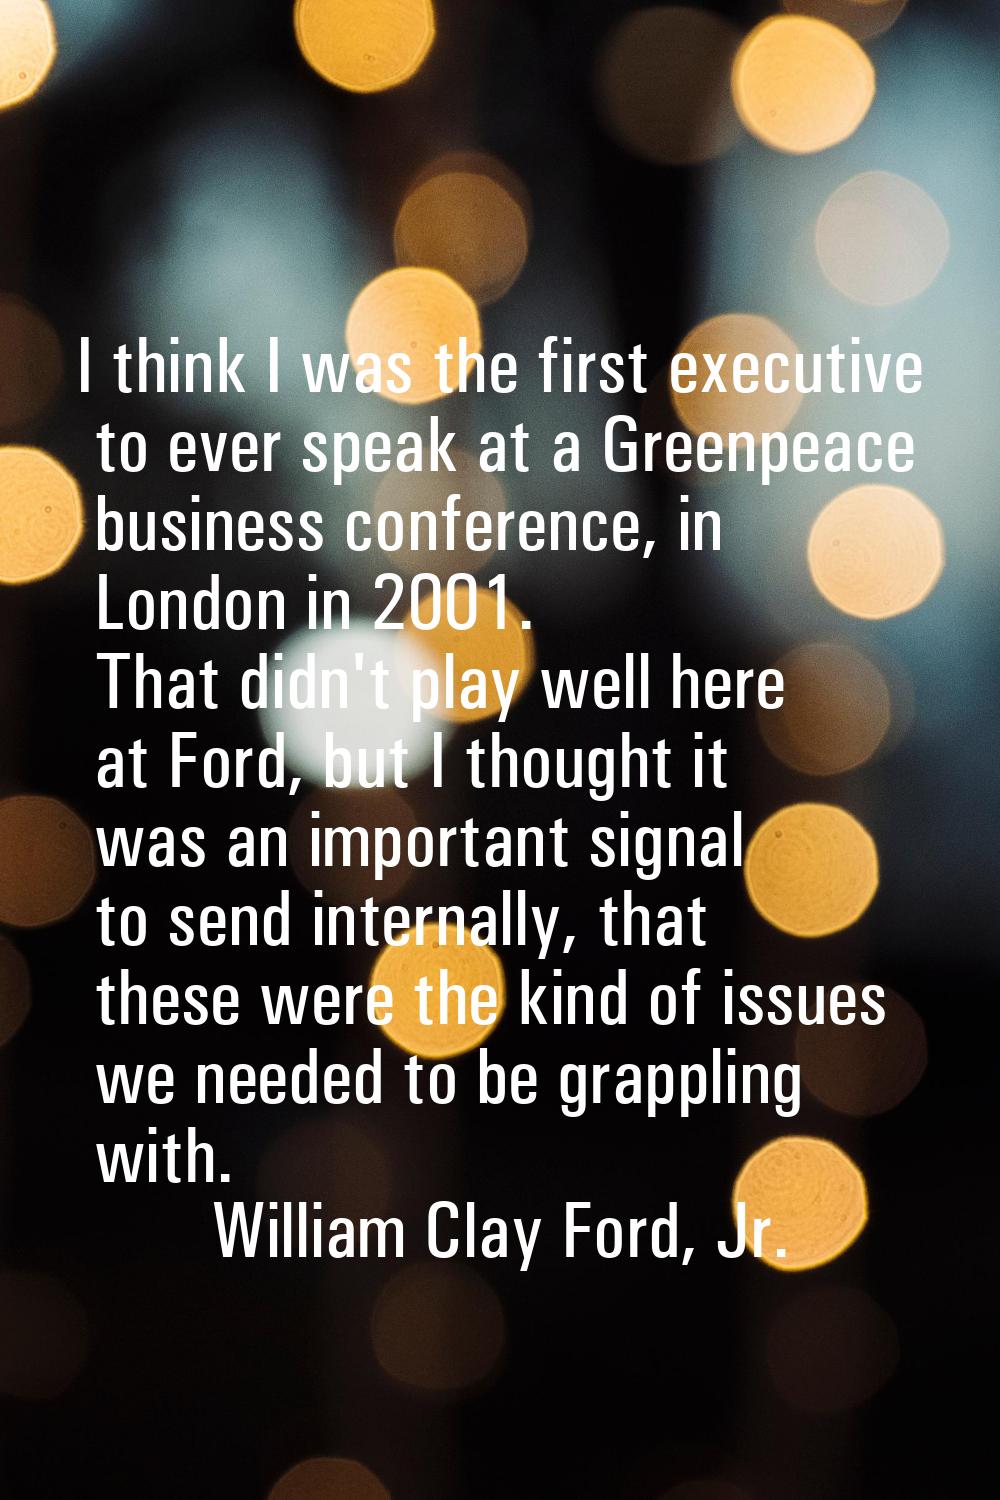 I think I was the first executive to ever speak at a Greenpeace business conference, in London in 2